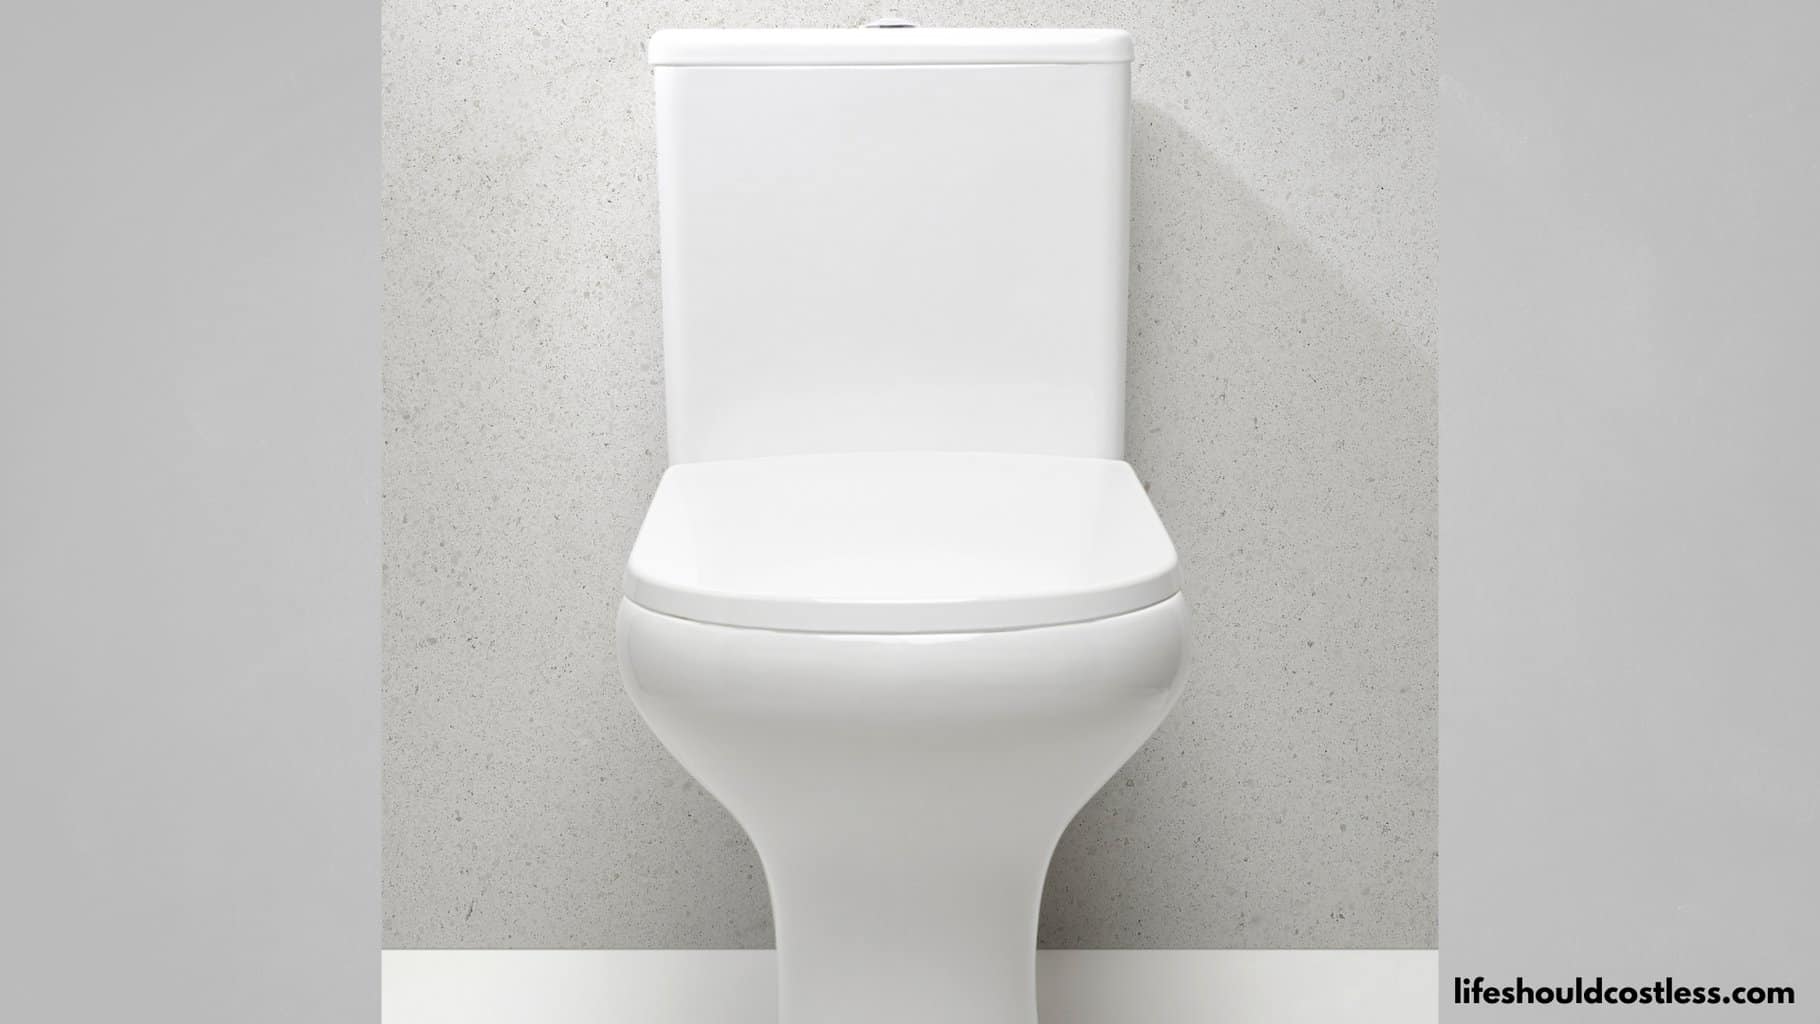 5 Simple Tricks To Keep Your Toilet Clean